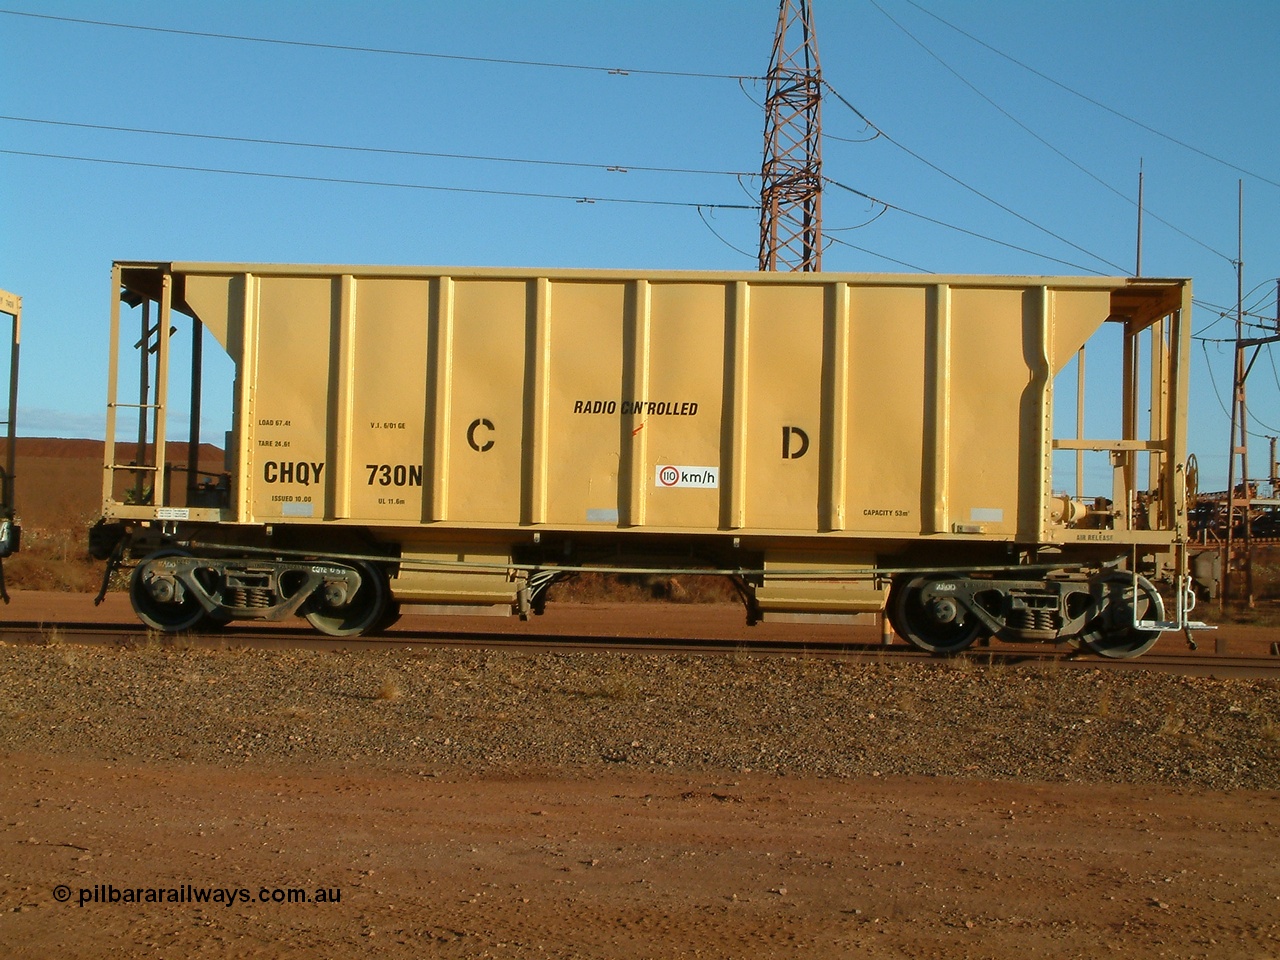 040815 164652
Nelson Point, CFCLA ballast waggon CHQY type 730 just being delivered to BHP Iron Ore as part of the Rail PACE project, side view.
Keywords: CHQY-type;CHQY730;CFCLA;CRDX-type;BHP-ballast-waggon;